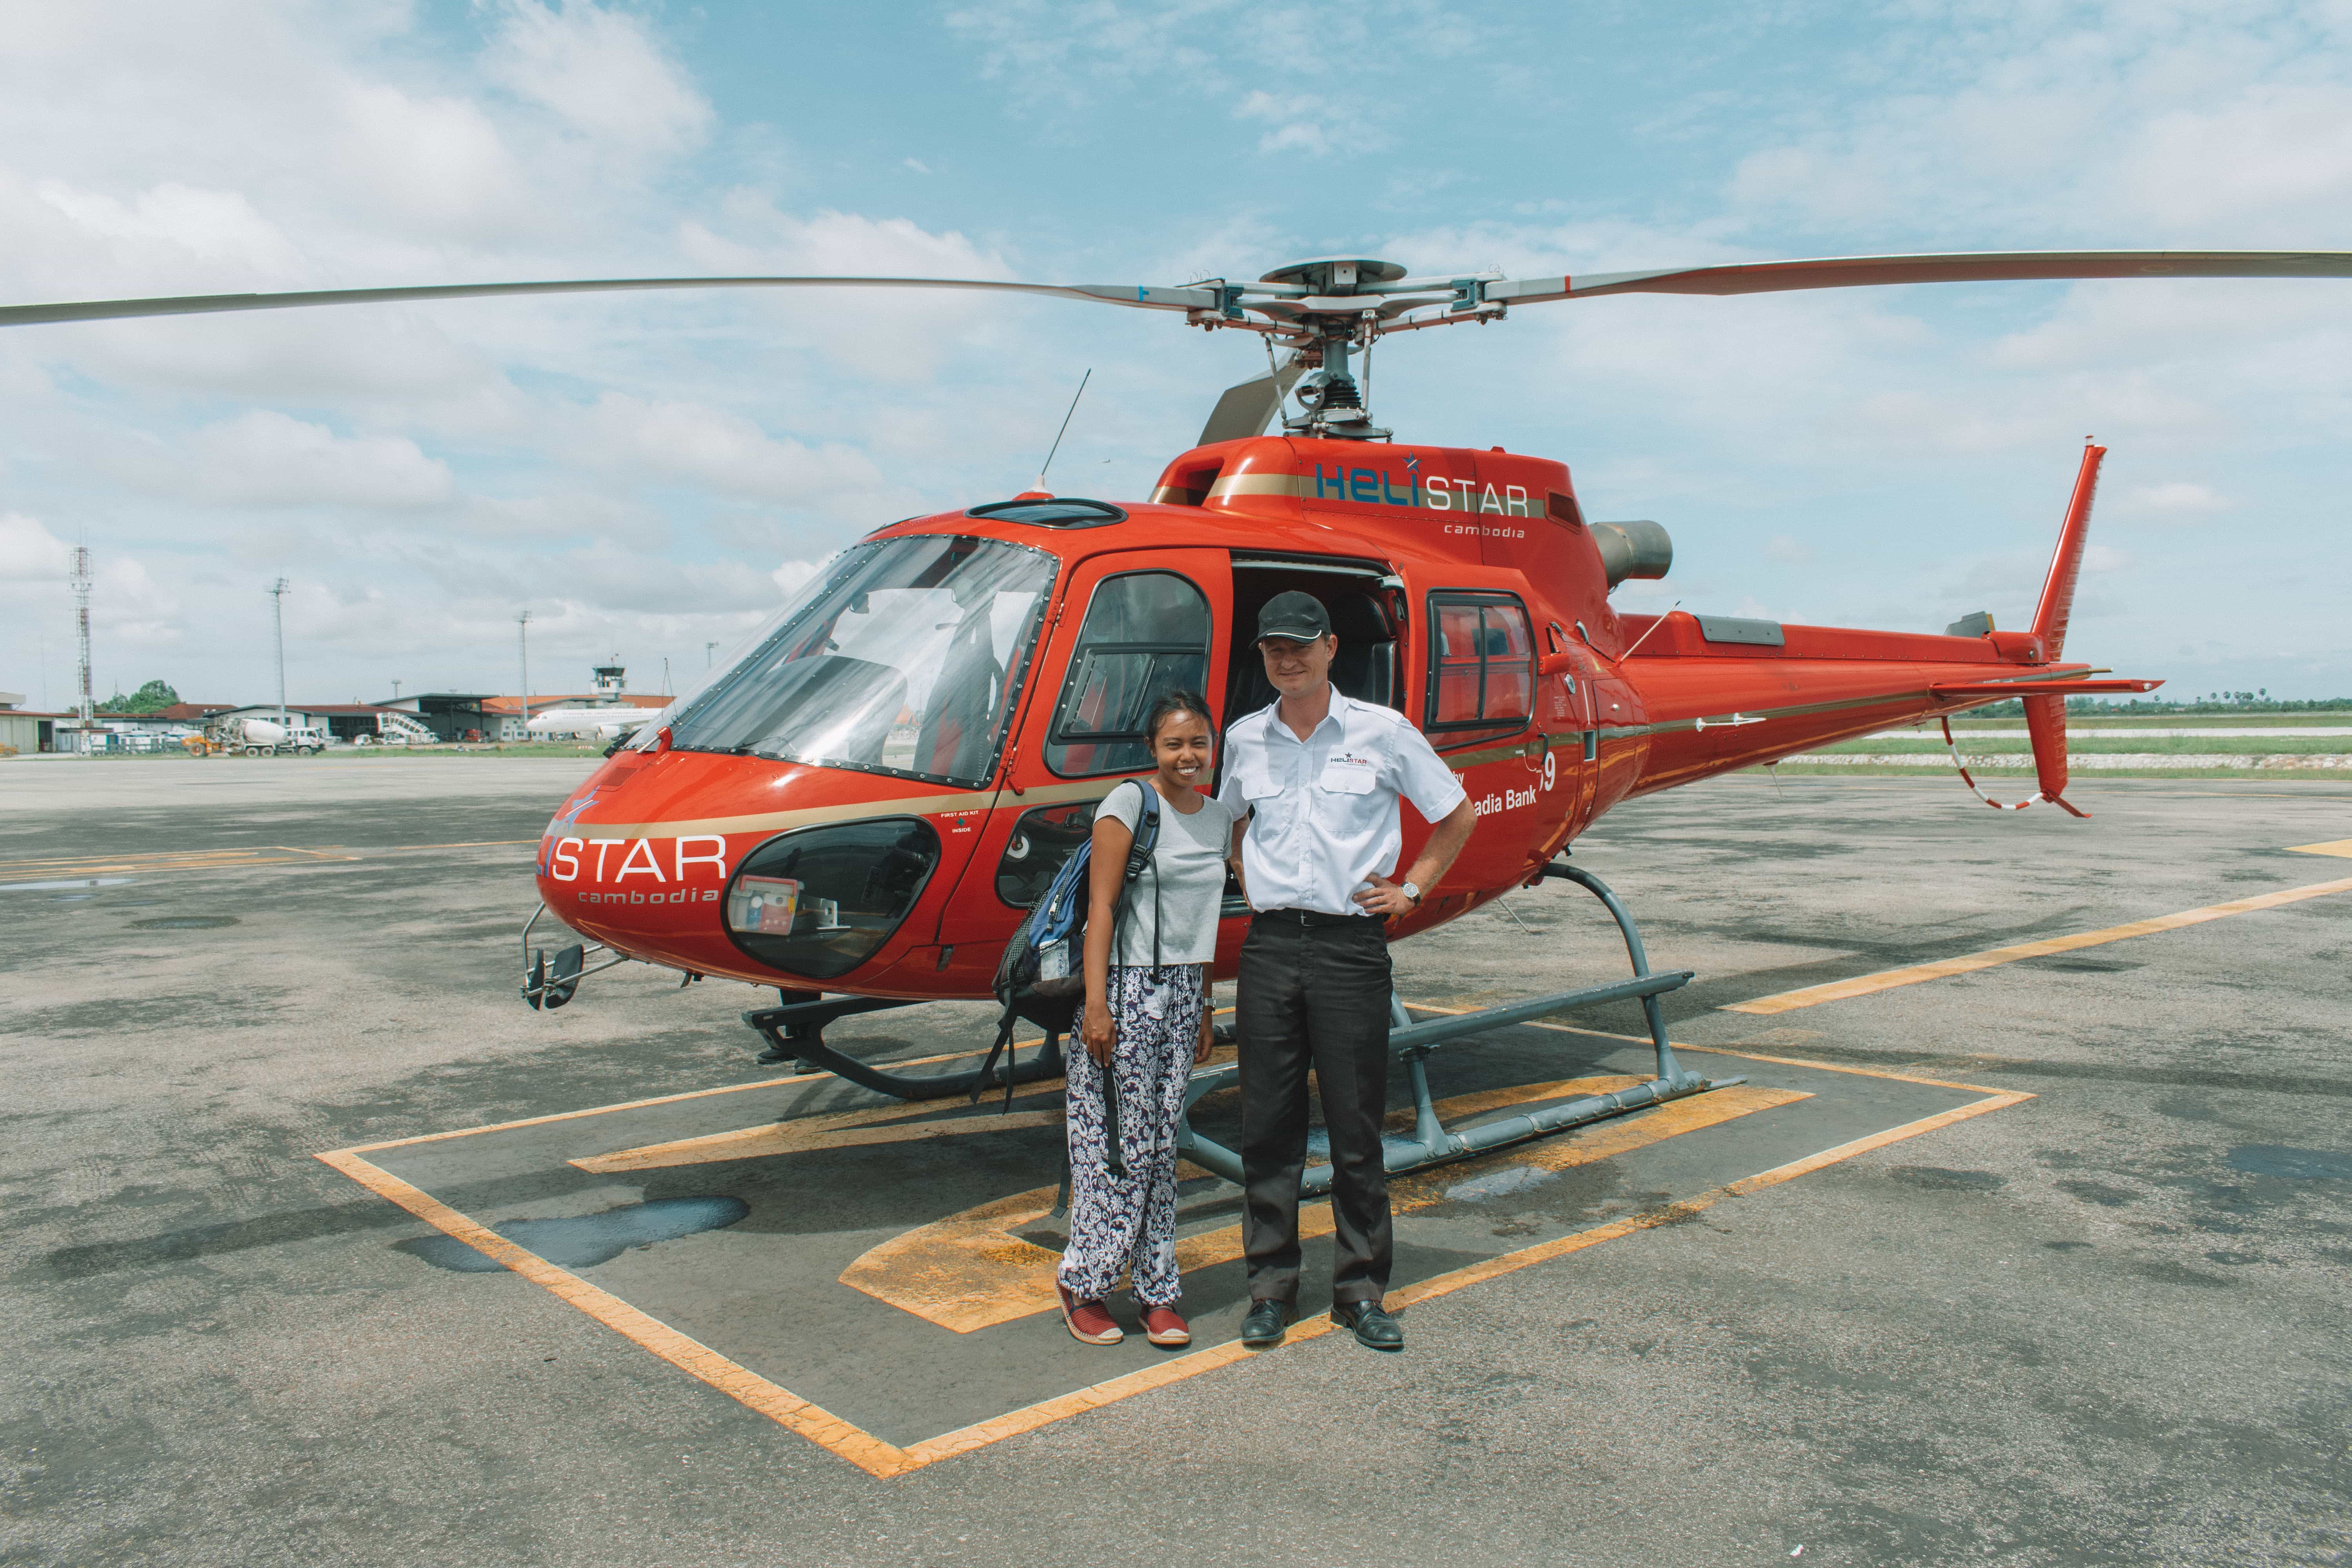 a helicopter scenic flight around Siem Reap with the captain